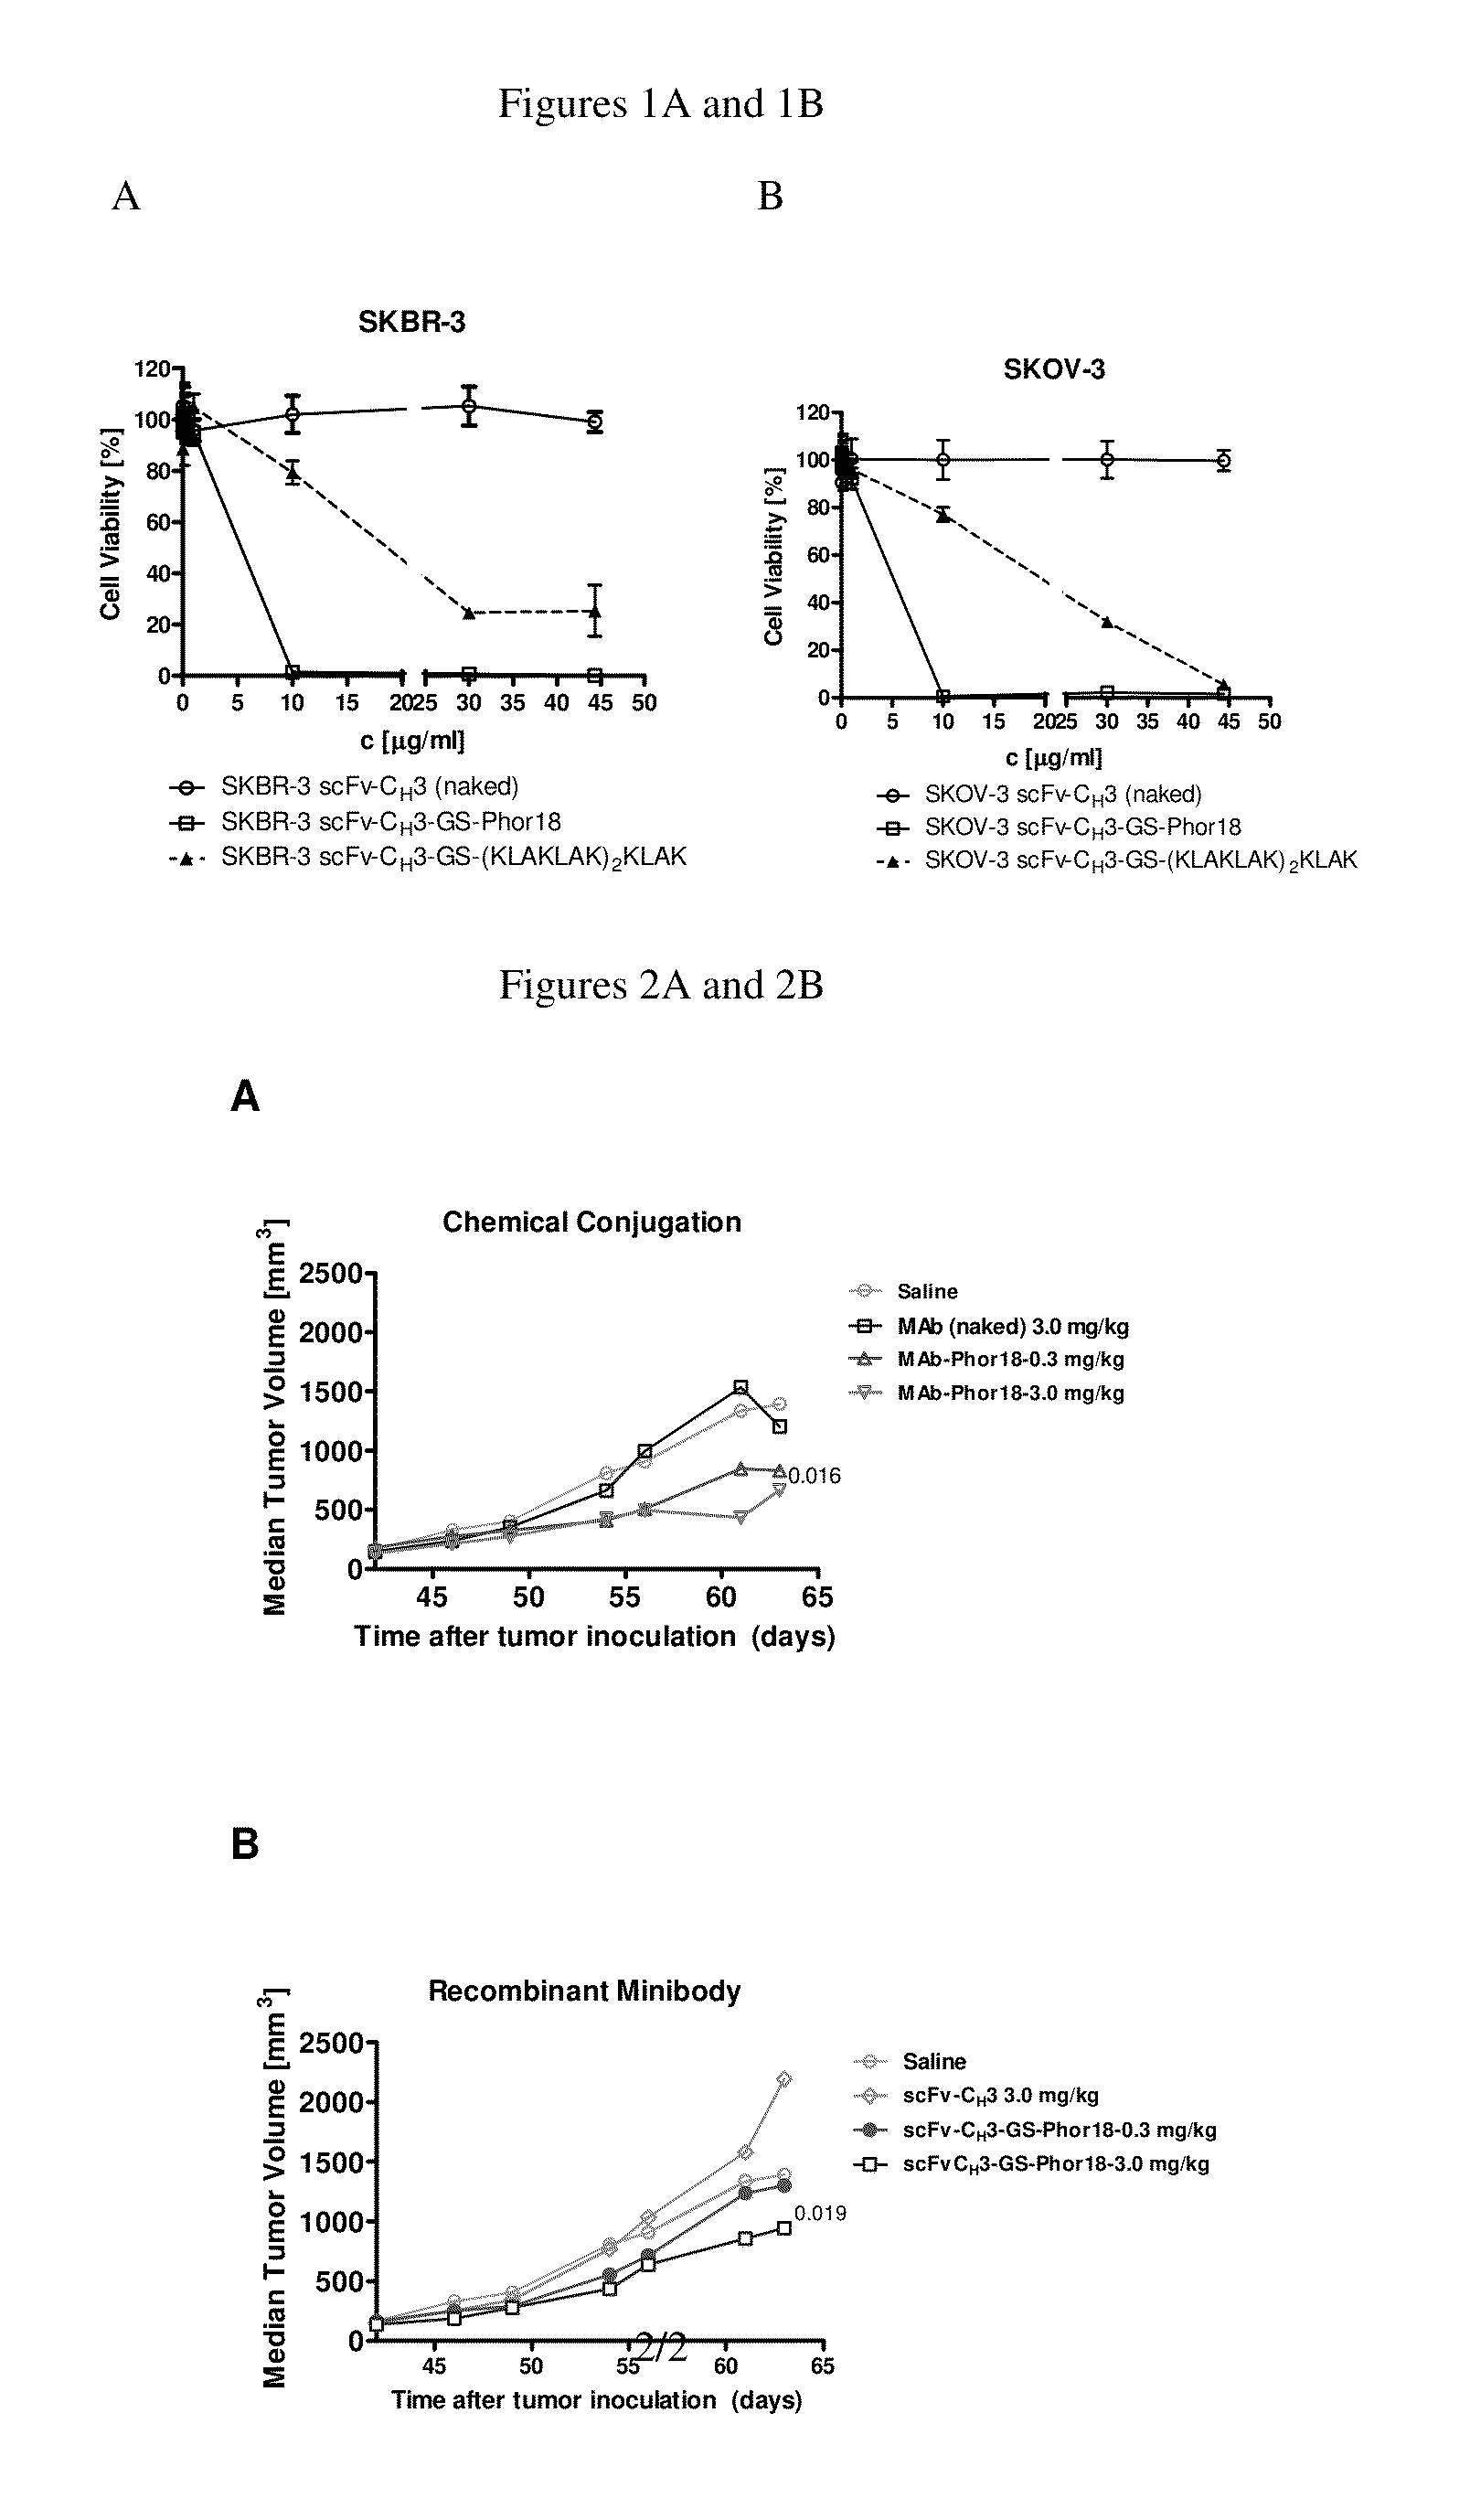 Lytic-peptide-her2/neu (human epidermal growth factor receptor 2) ligand conjugates and methods of use